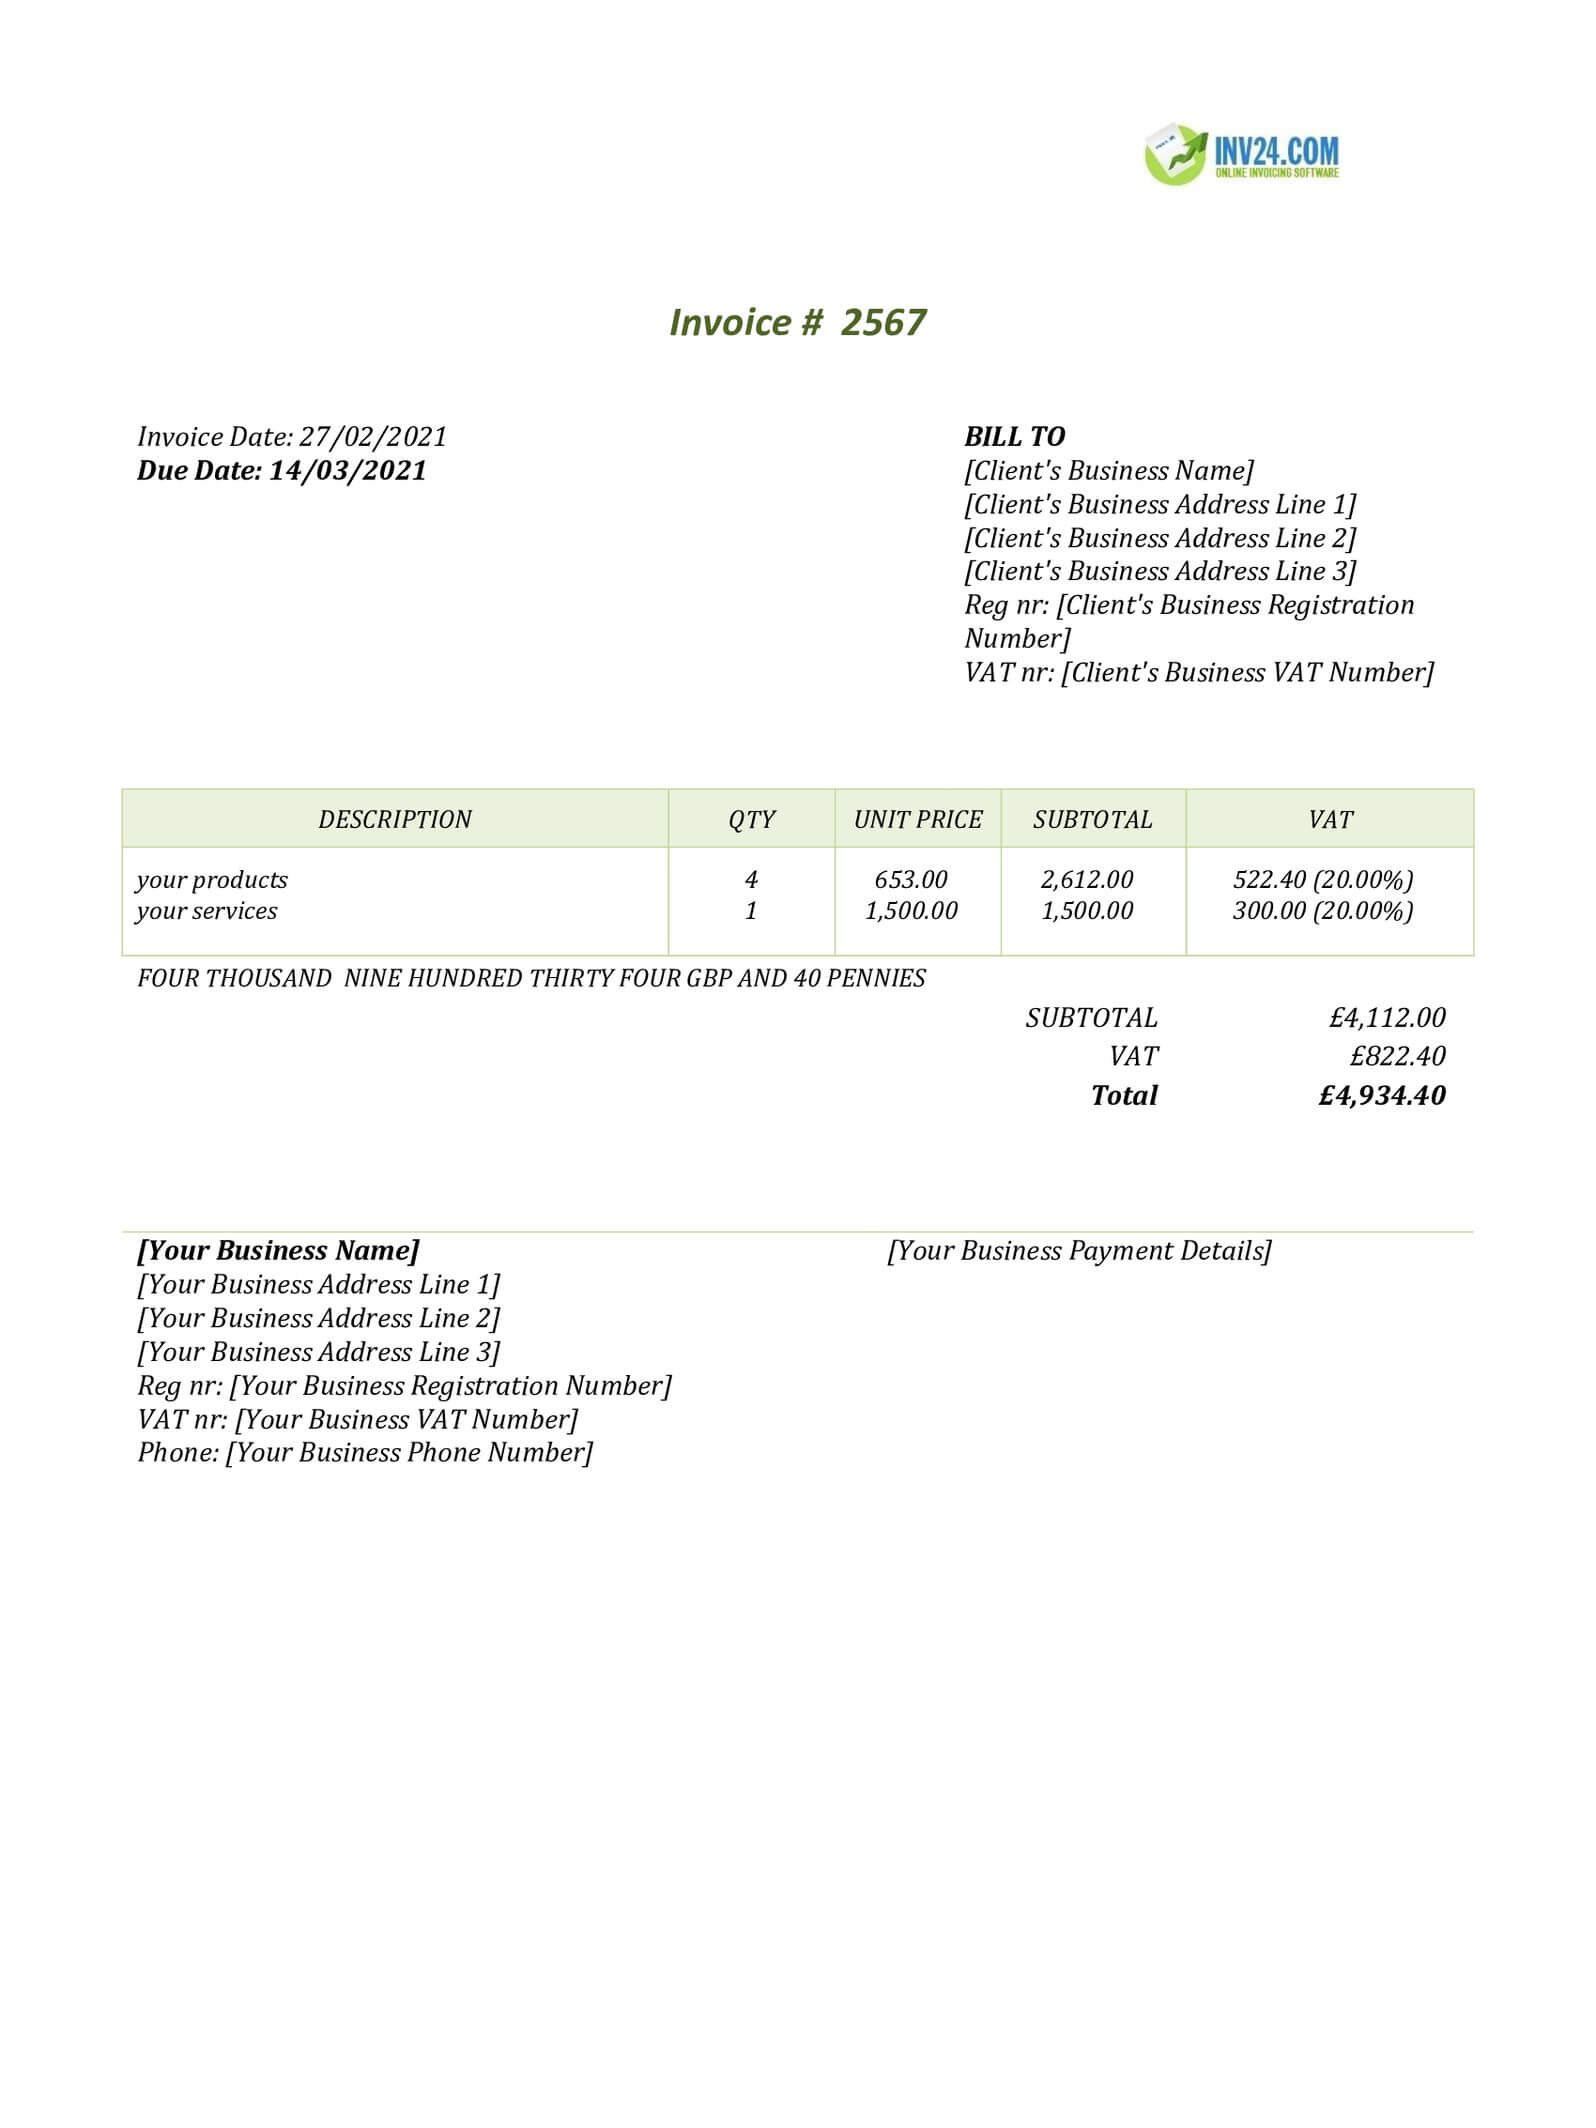 vat-invoice-template-uk-word-free-download-nude-photo-gallery